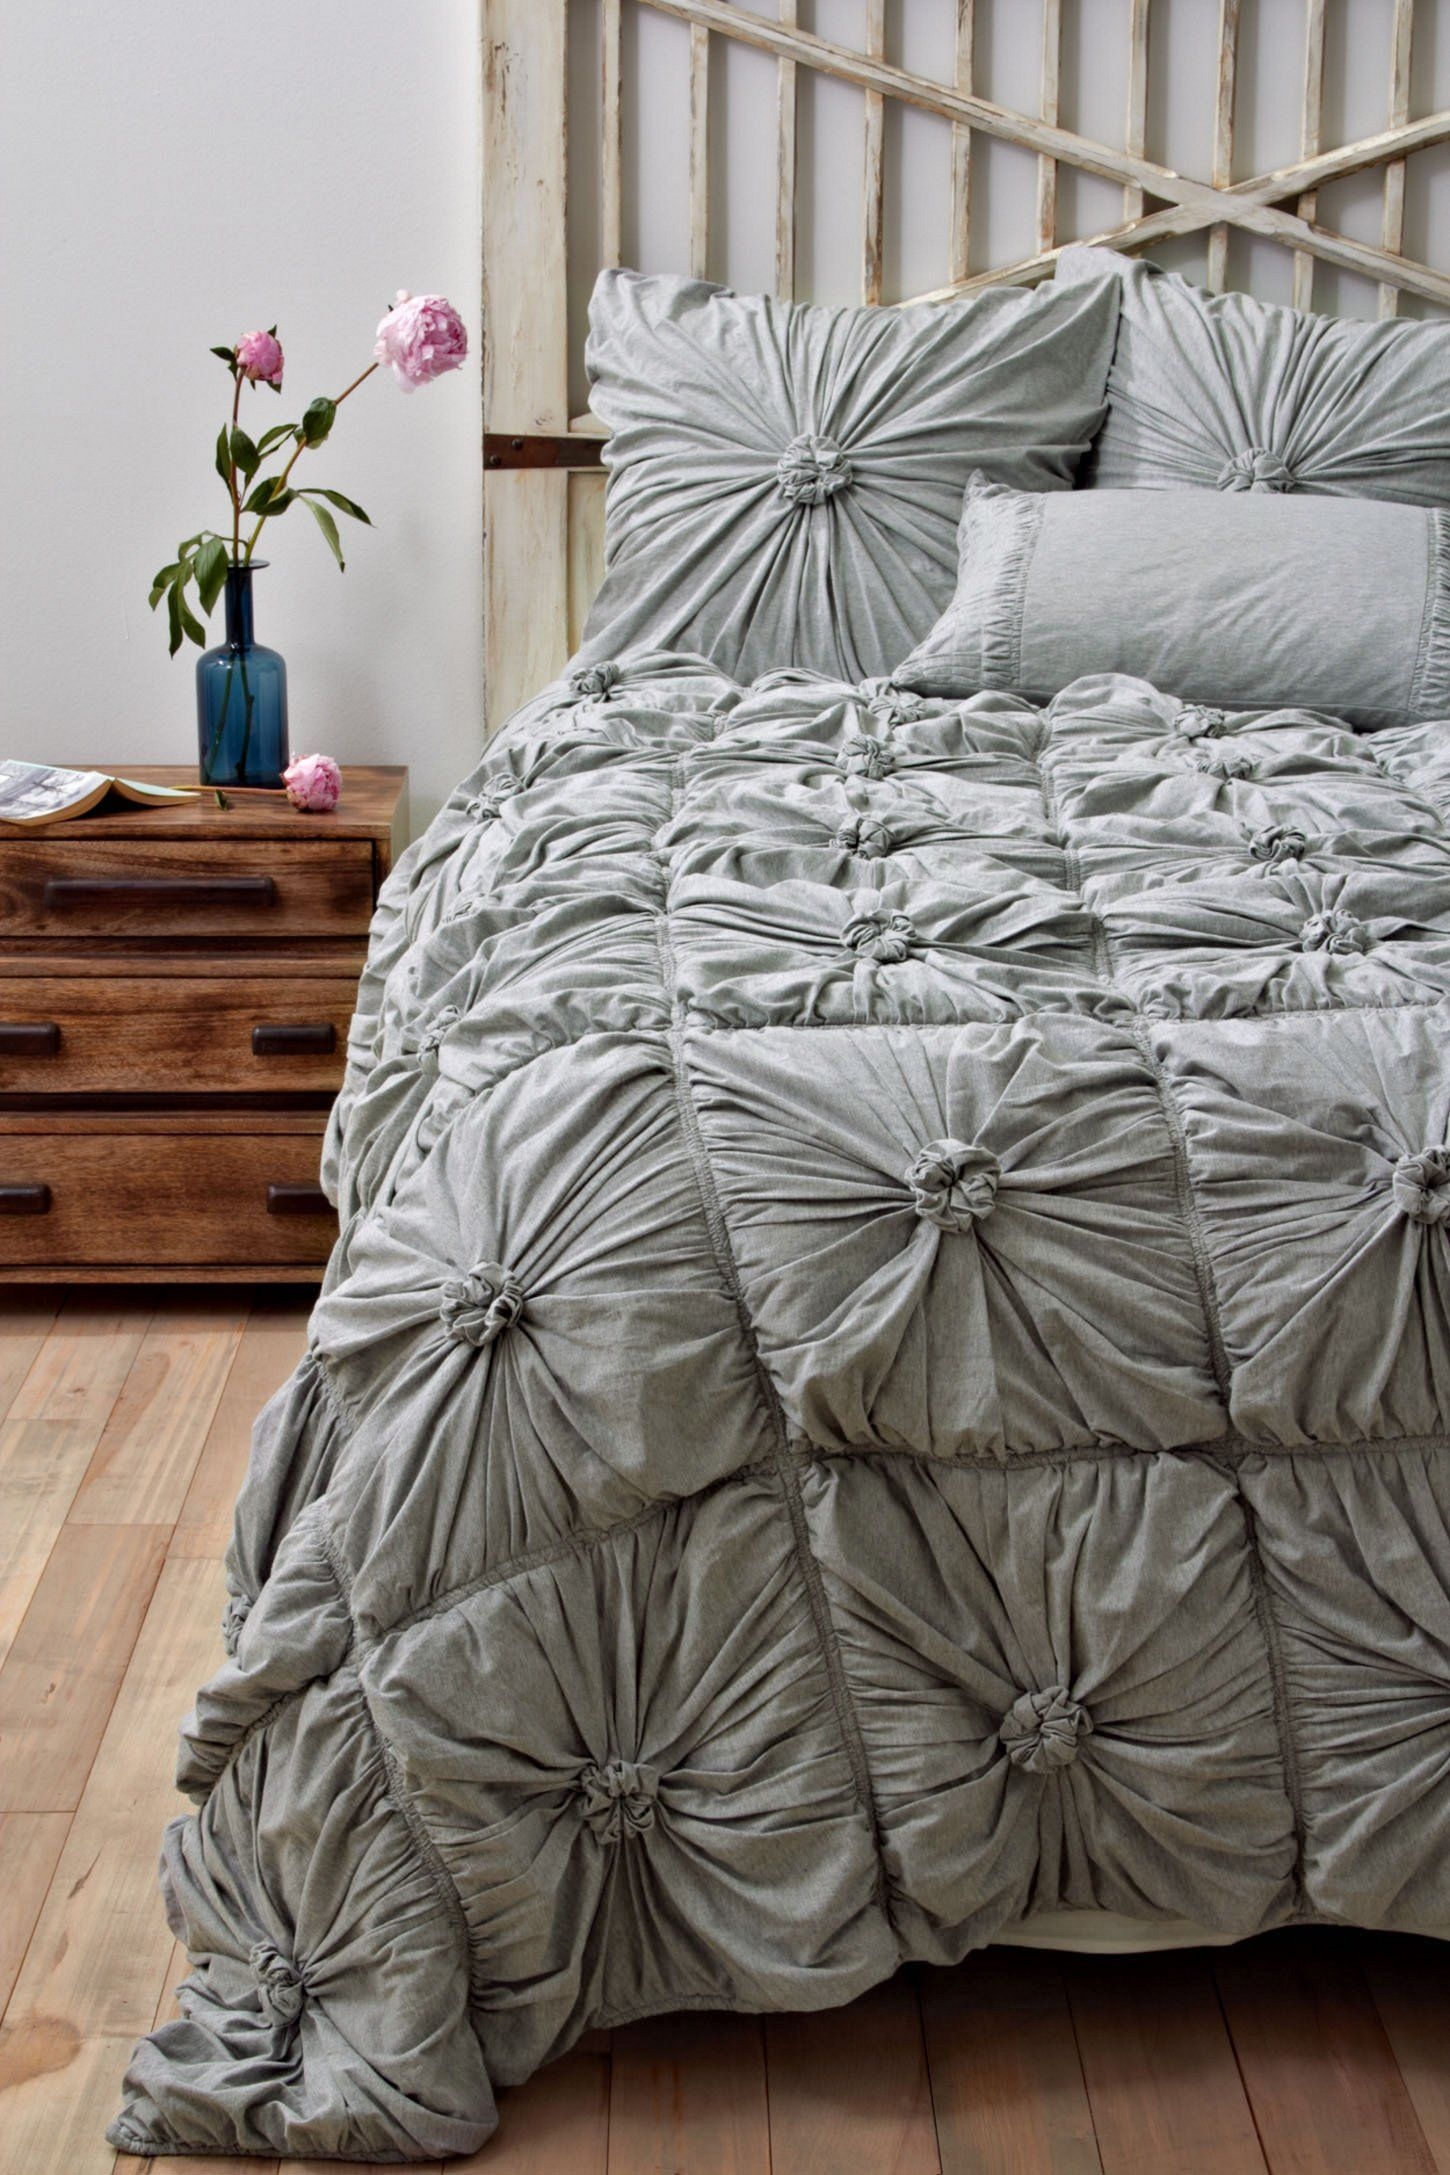 Ruffles and lace bedding